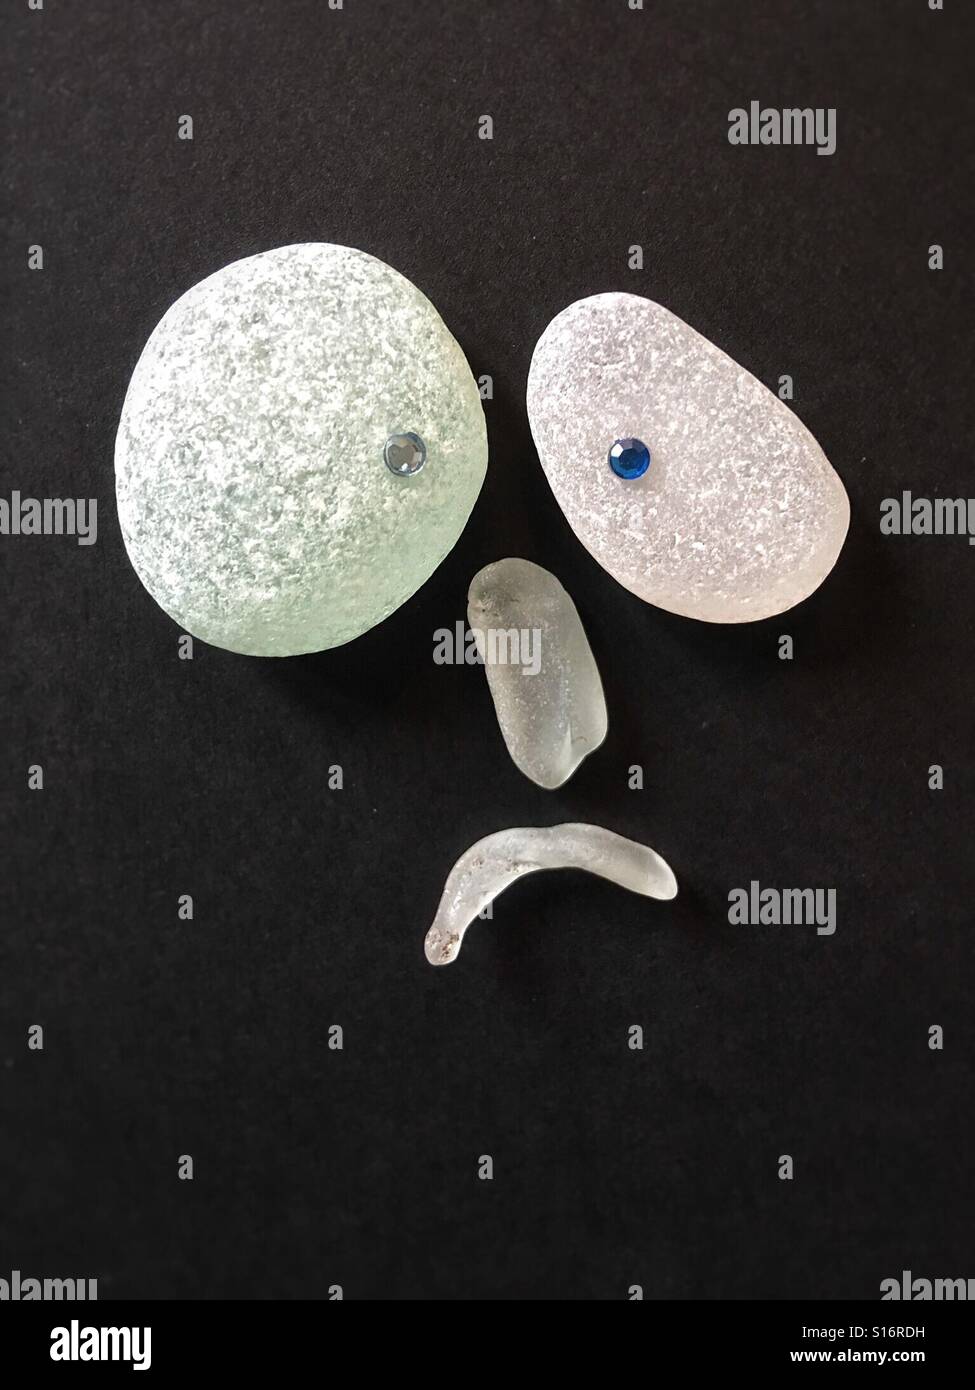 4 pieces of sea glass forming a face expressing dismay, on a black background Stock Photo